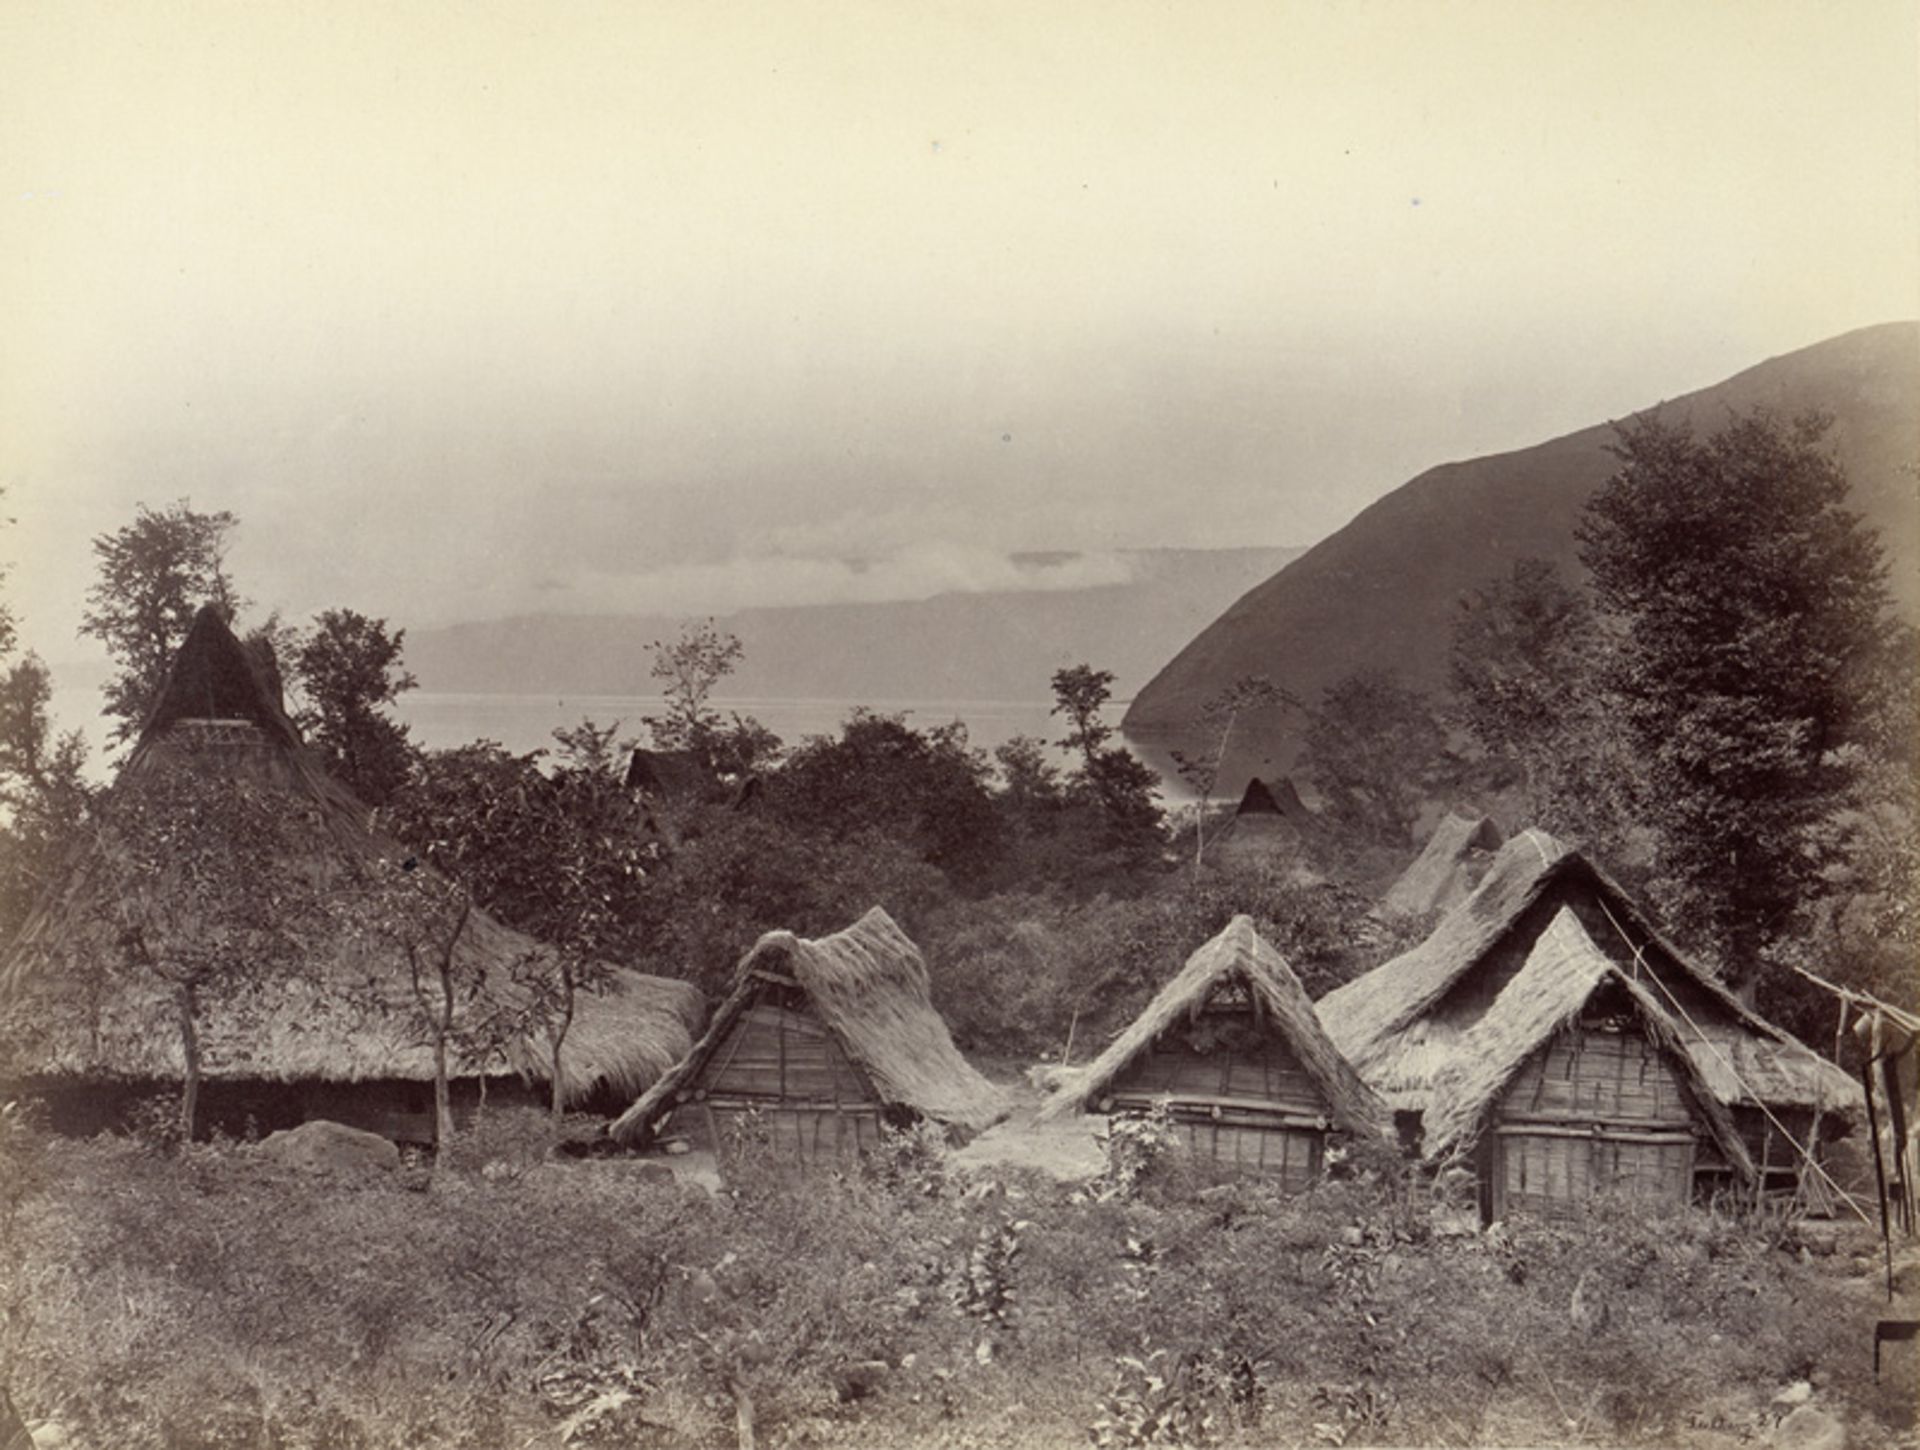 Dutch India: Views of the Indonesian Archipelago - Image 2 of 3